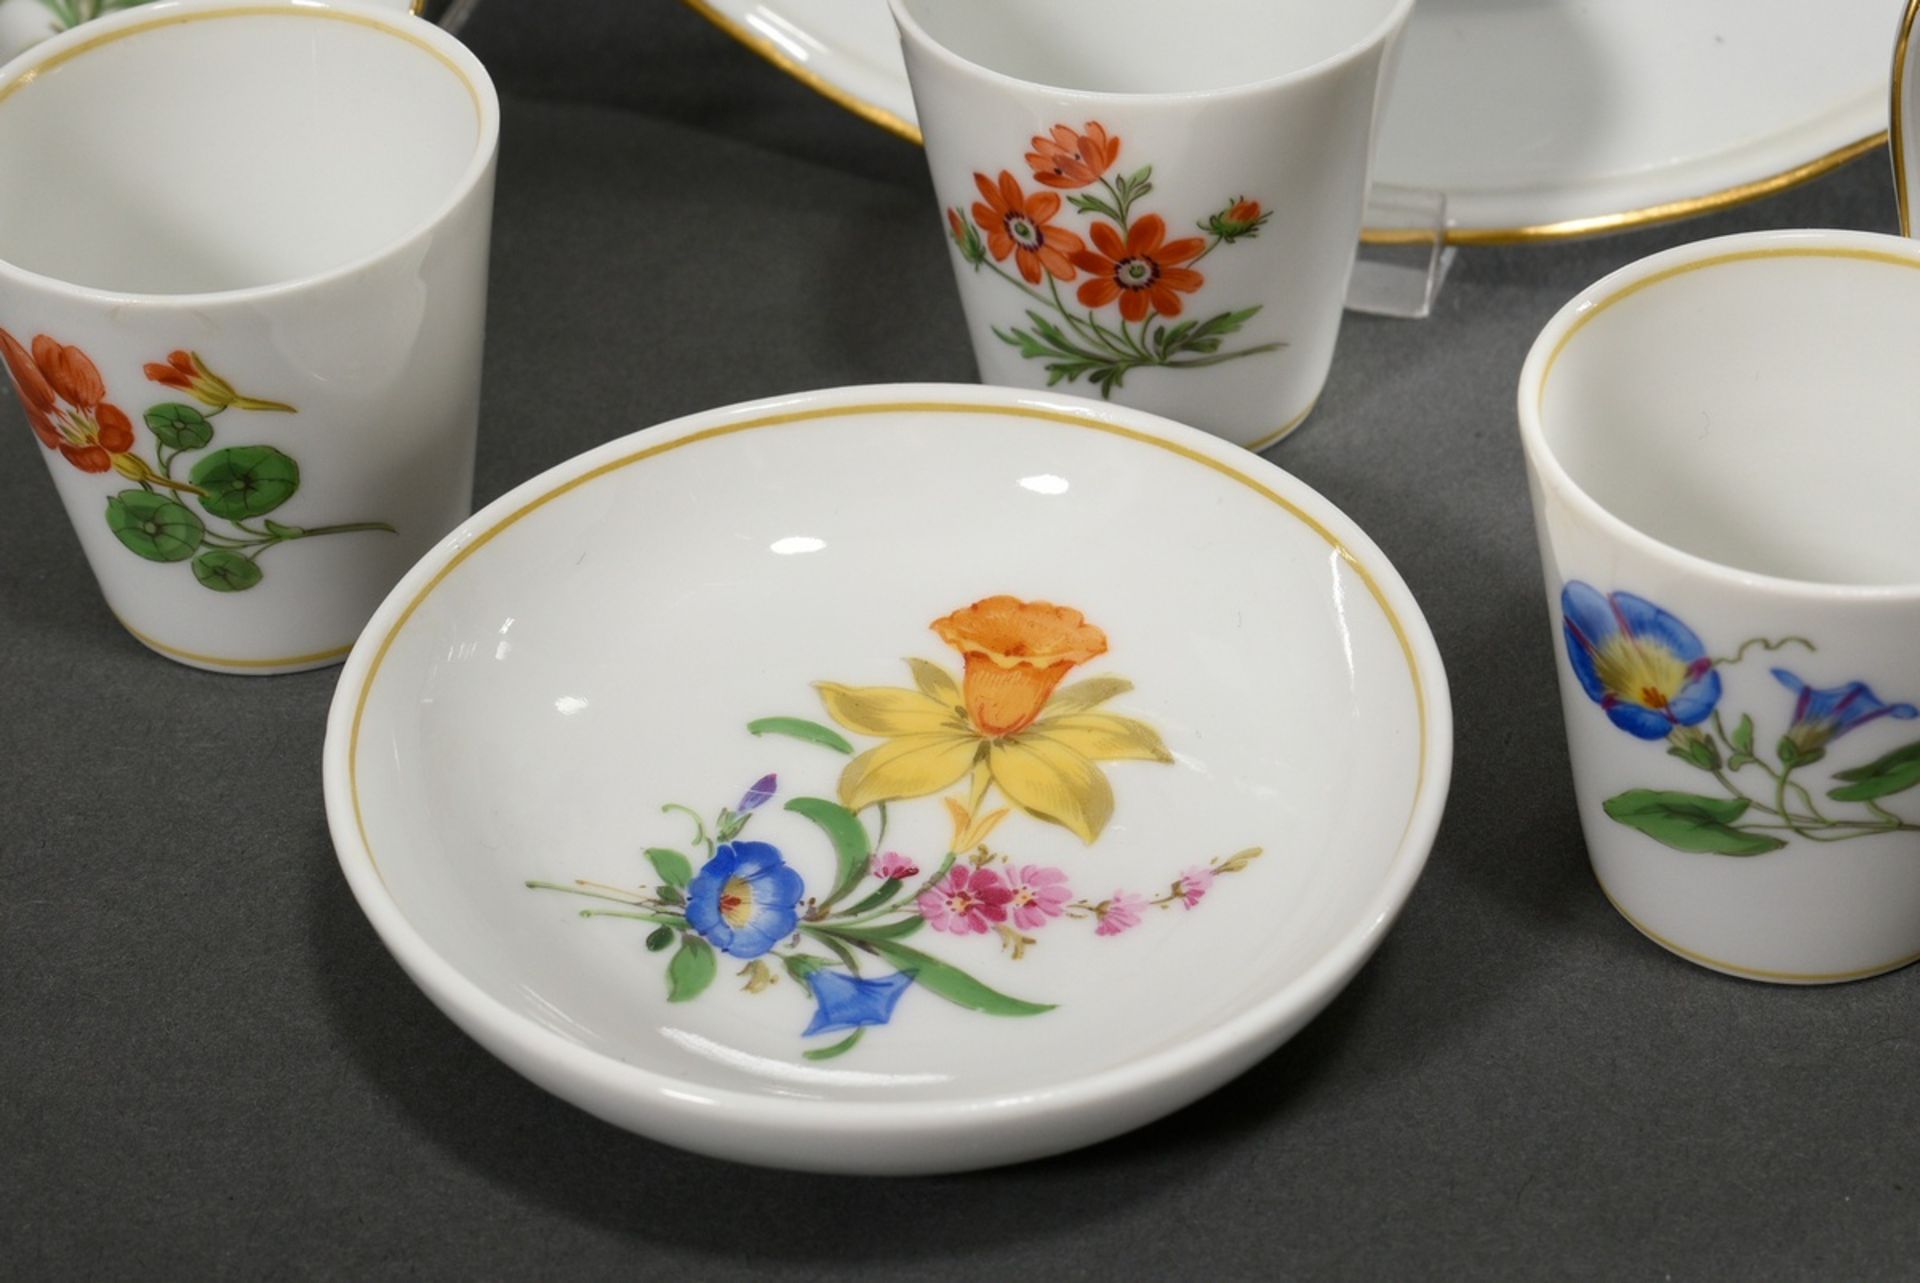 11 Various pieces Meissen "German Flower" with gold staffage and yellow rim (war painting), 1924-19 - Image 2 of 6